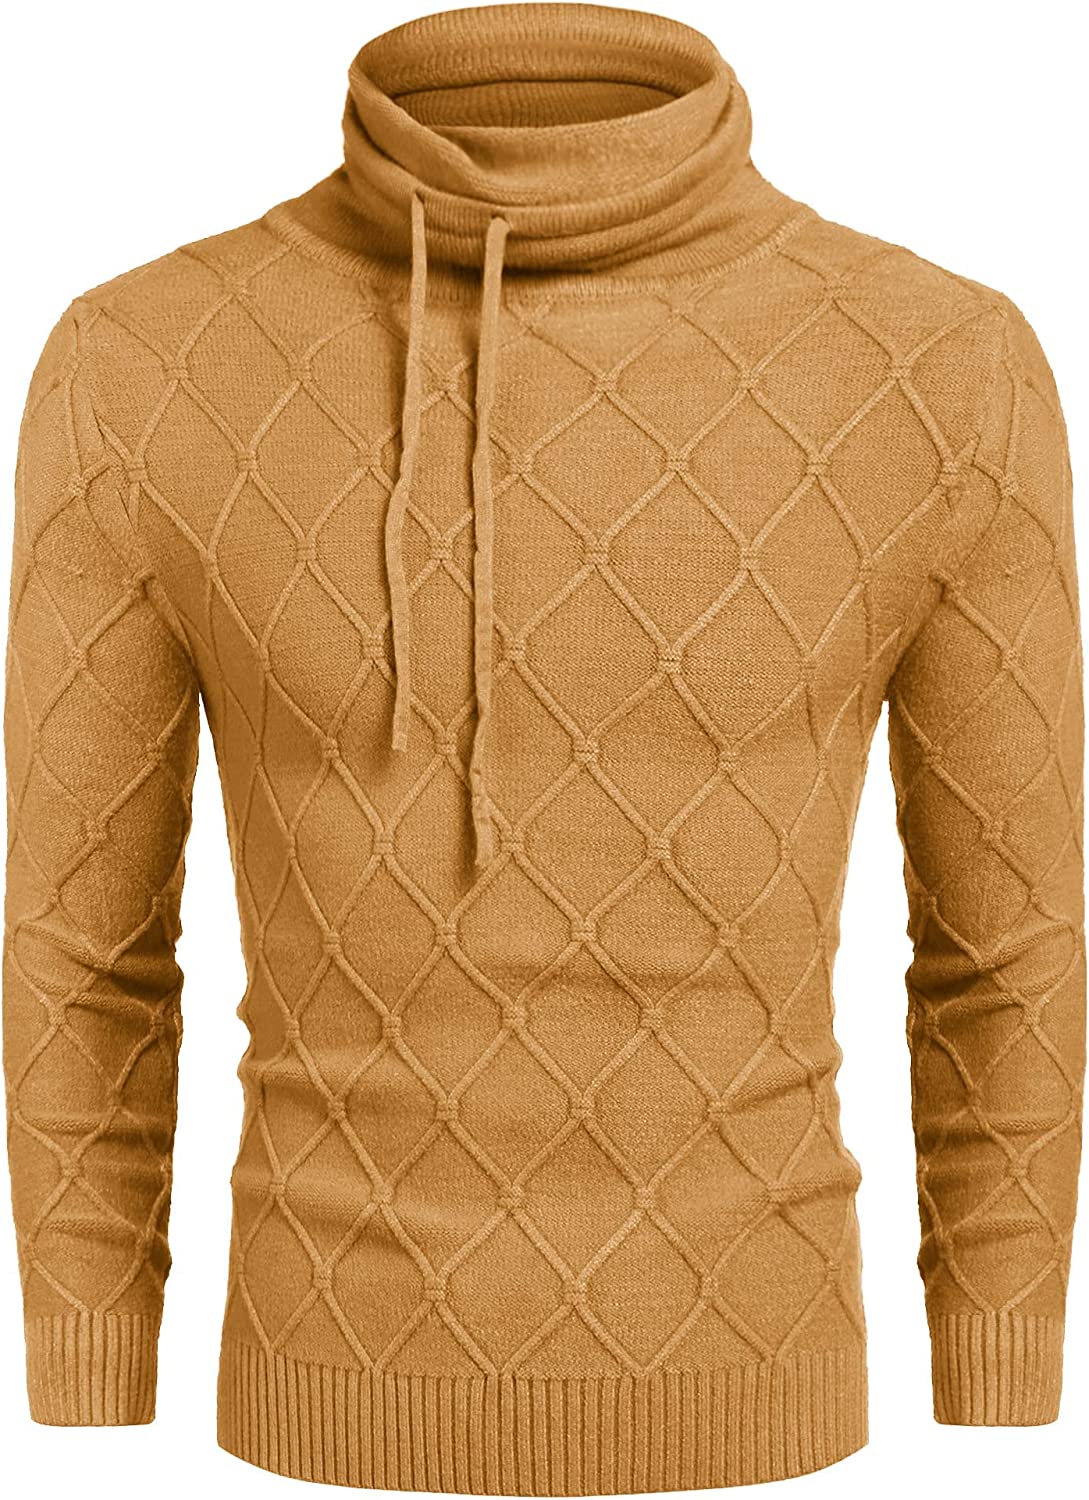 COOFANDY Men's Knitted Turtleneck Sweater Casual Thermal Long Sleeve Pullover Pullovers COOFANDY Store Yellow Small 